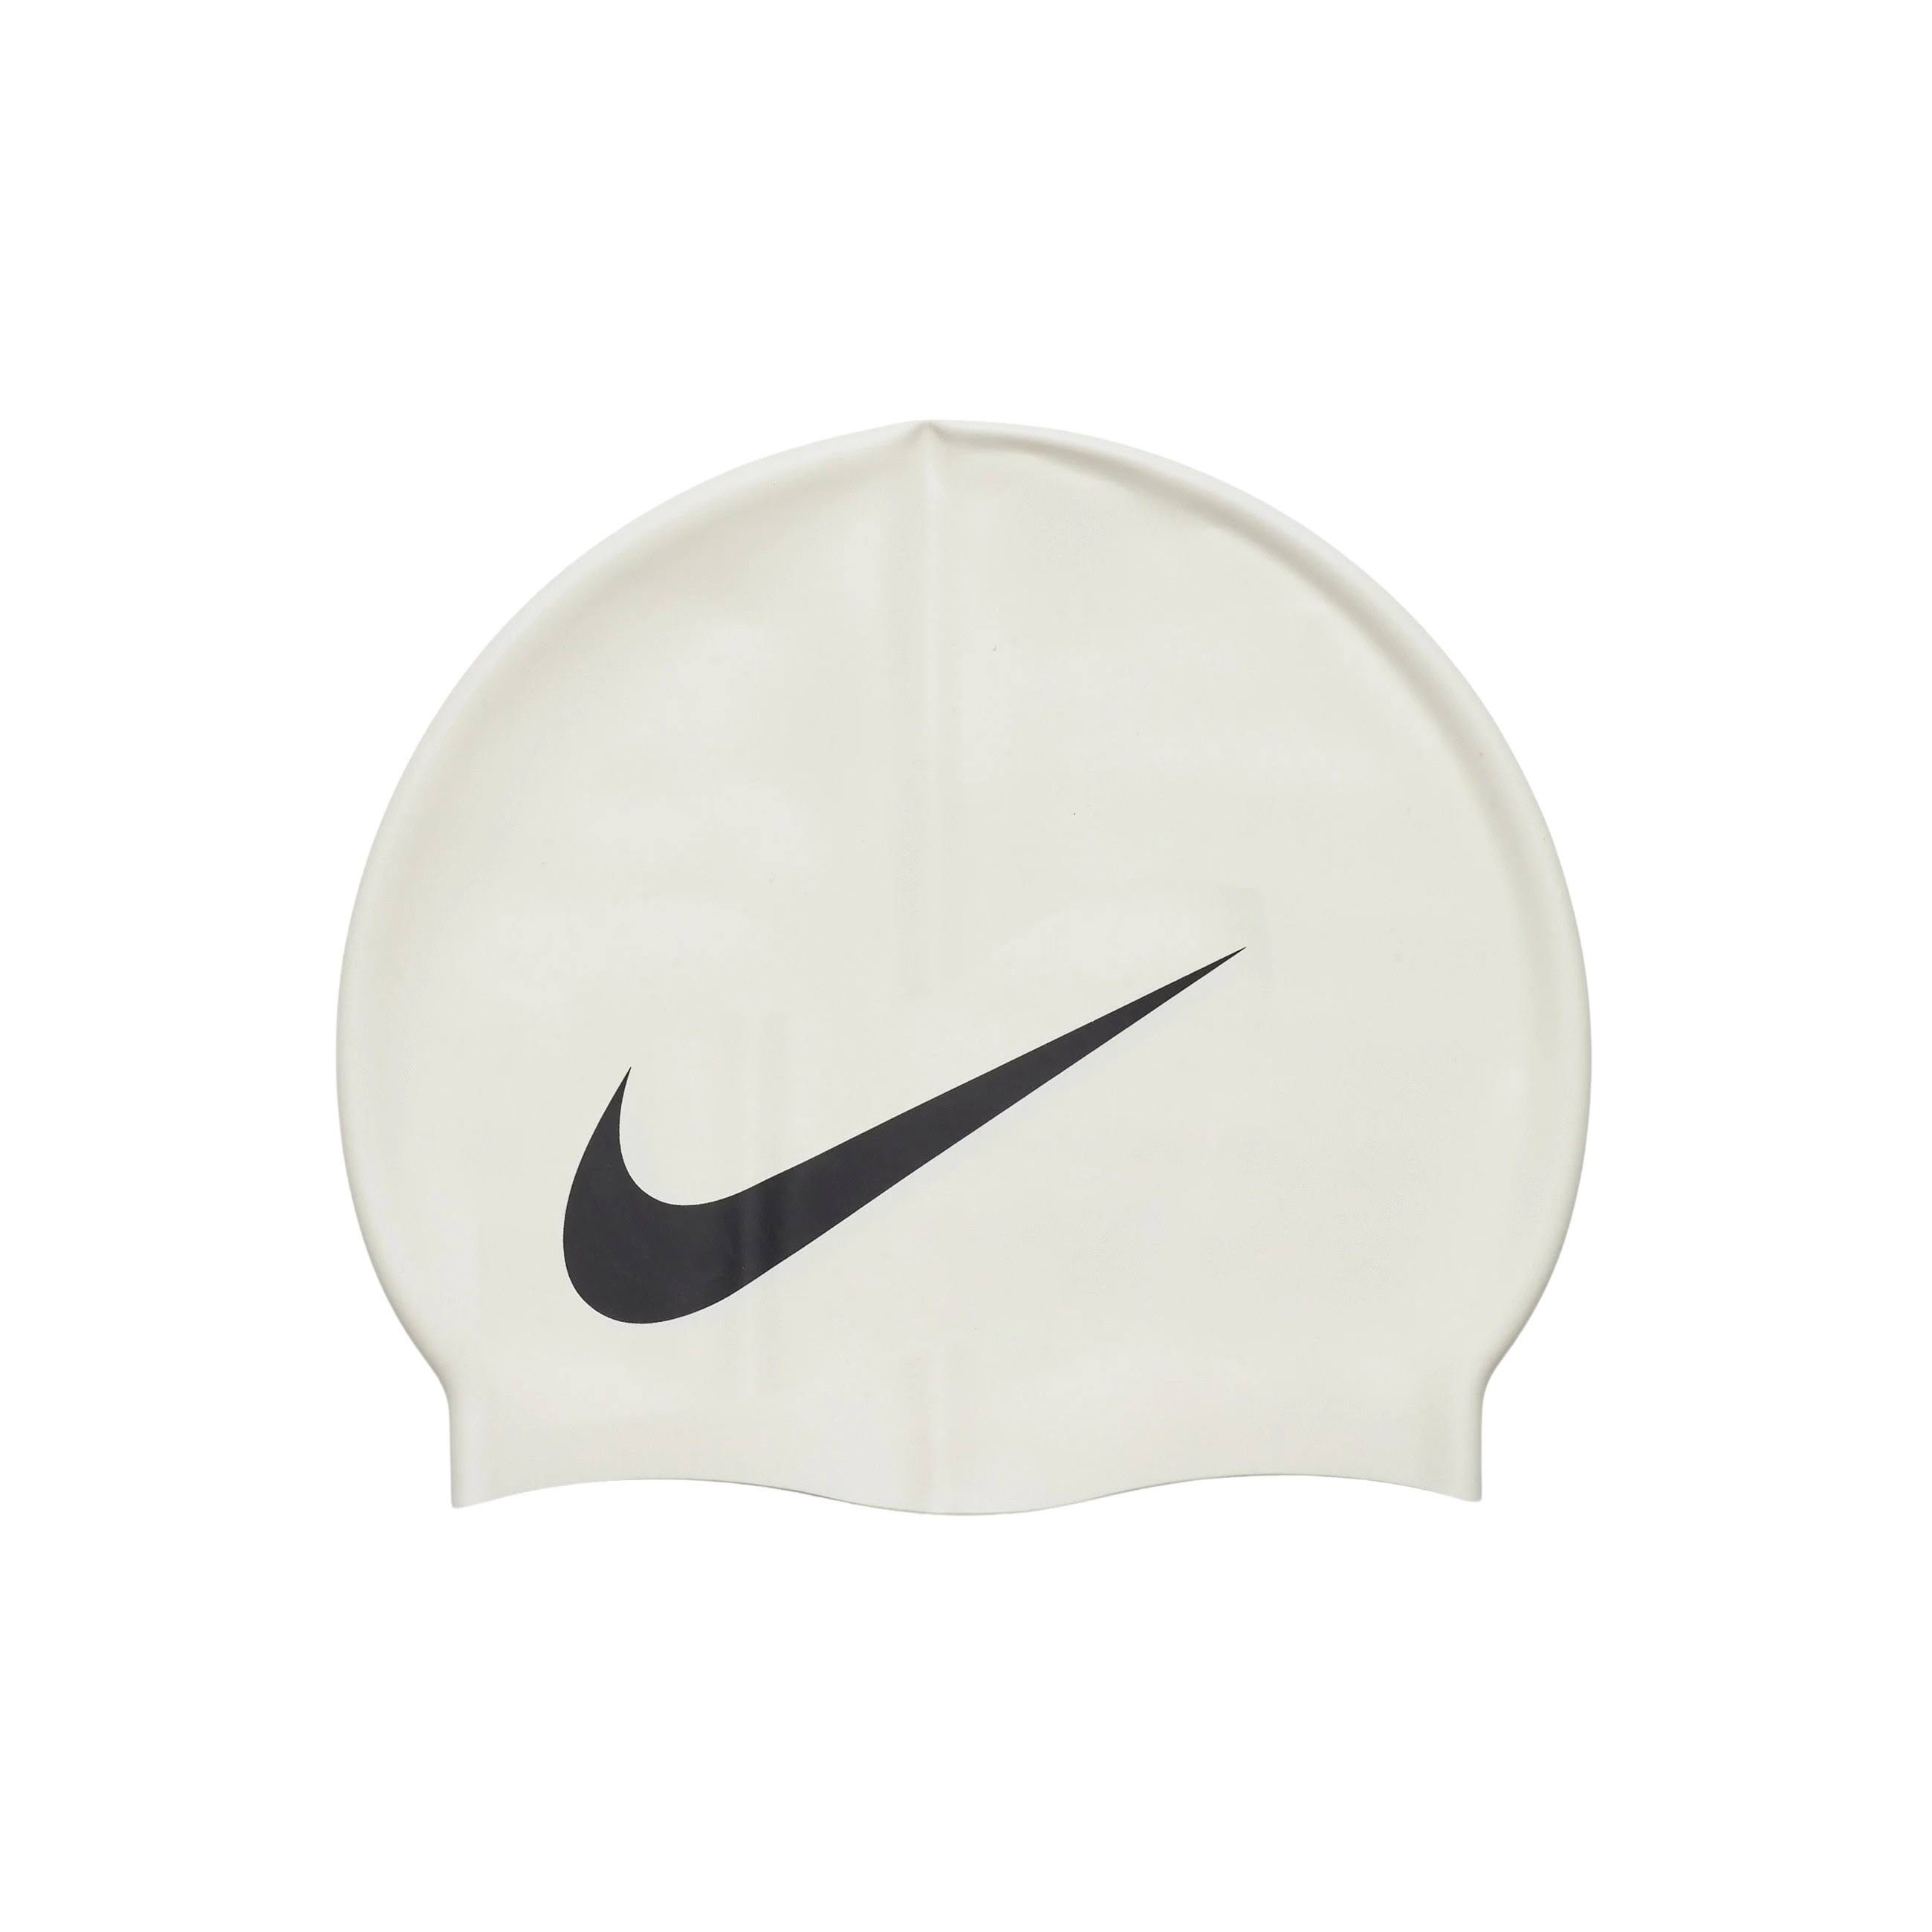 Durable Nike Big Swoosh Cap for Swimmers | Image